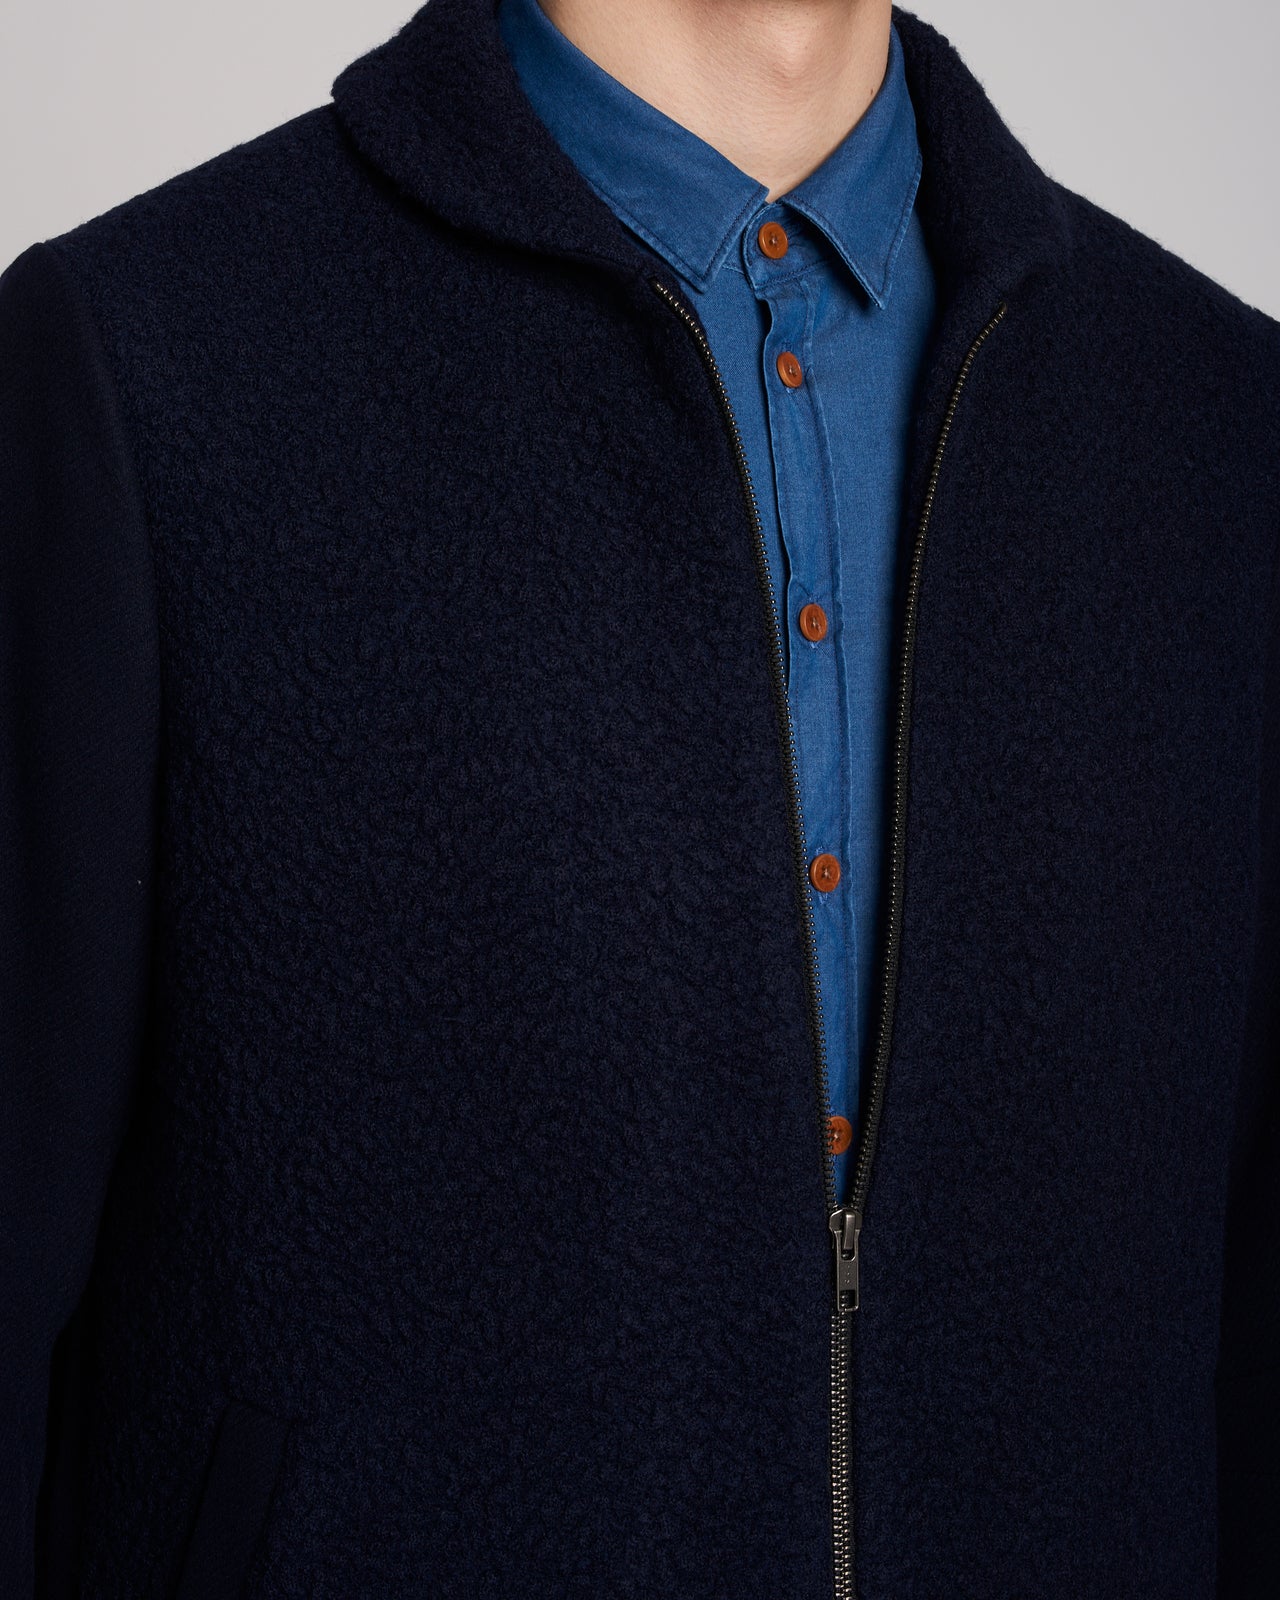 Sporty Round Collar Jacket in a Navy Blue Soft Italian Wool